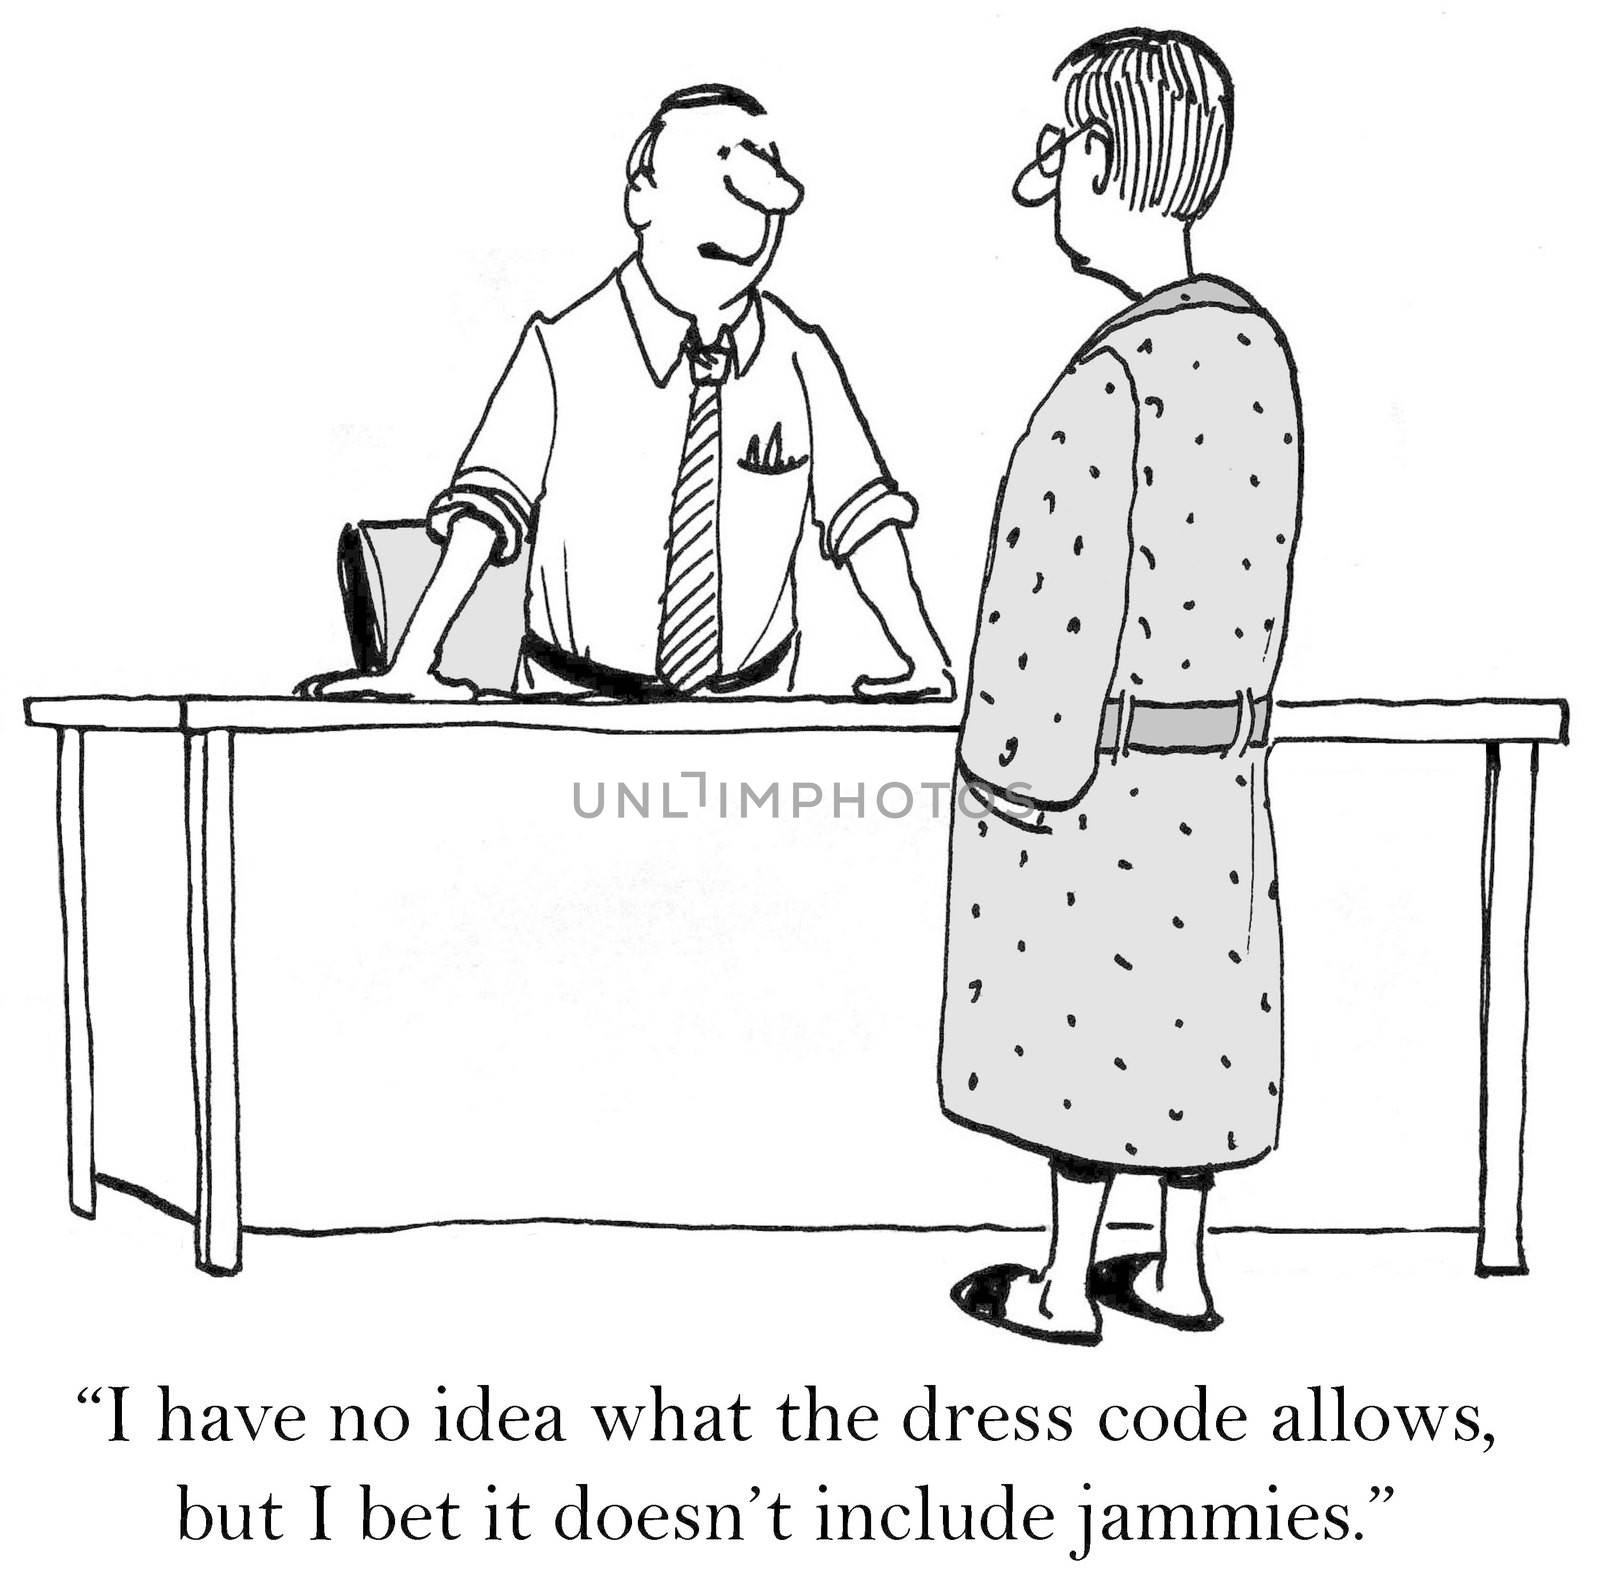 "I have no idea what the dress code allows, but I bet it doesn't include jammies."